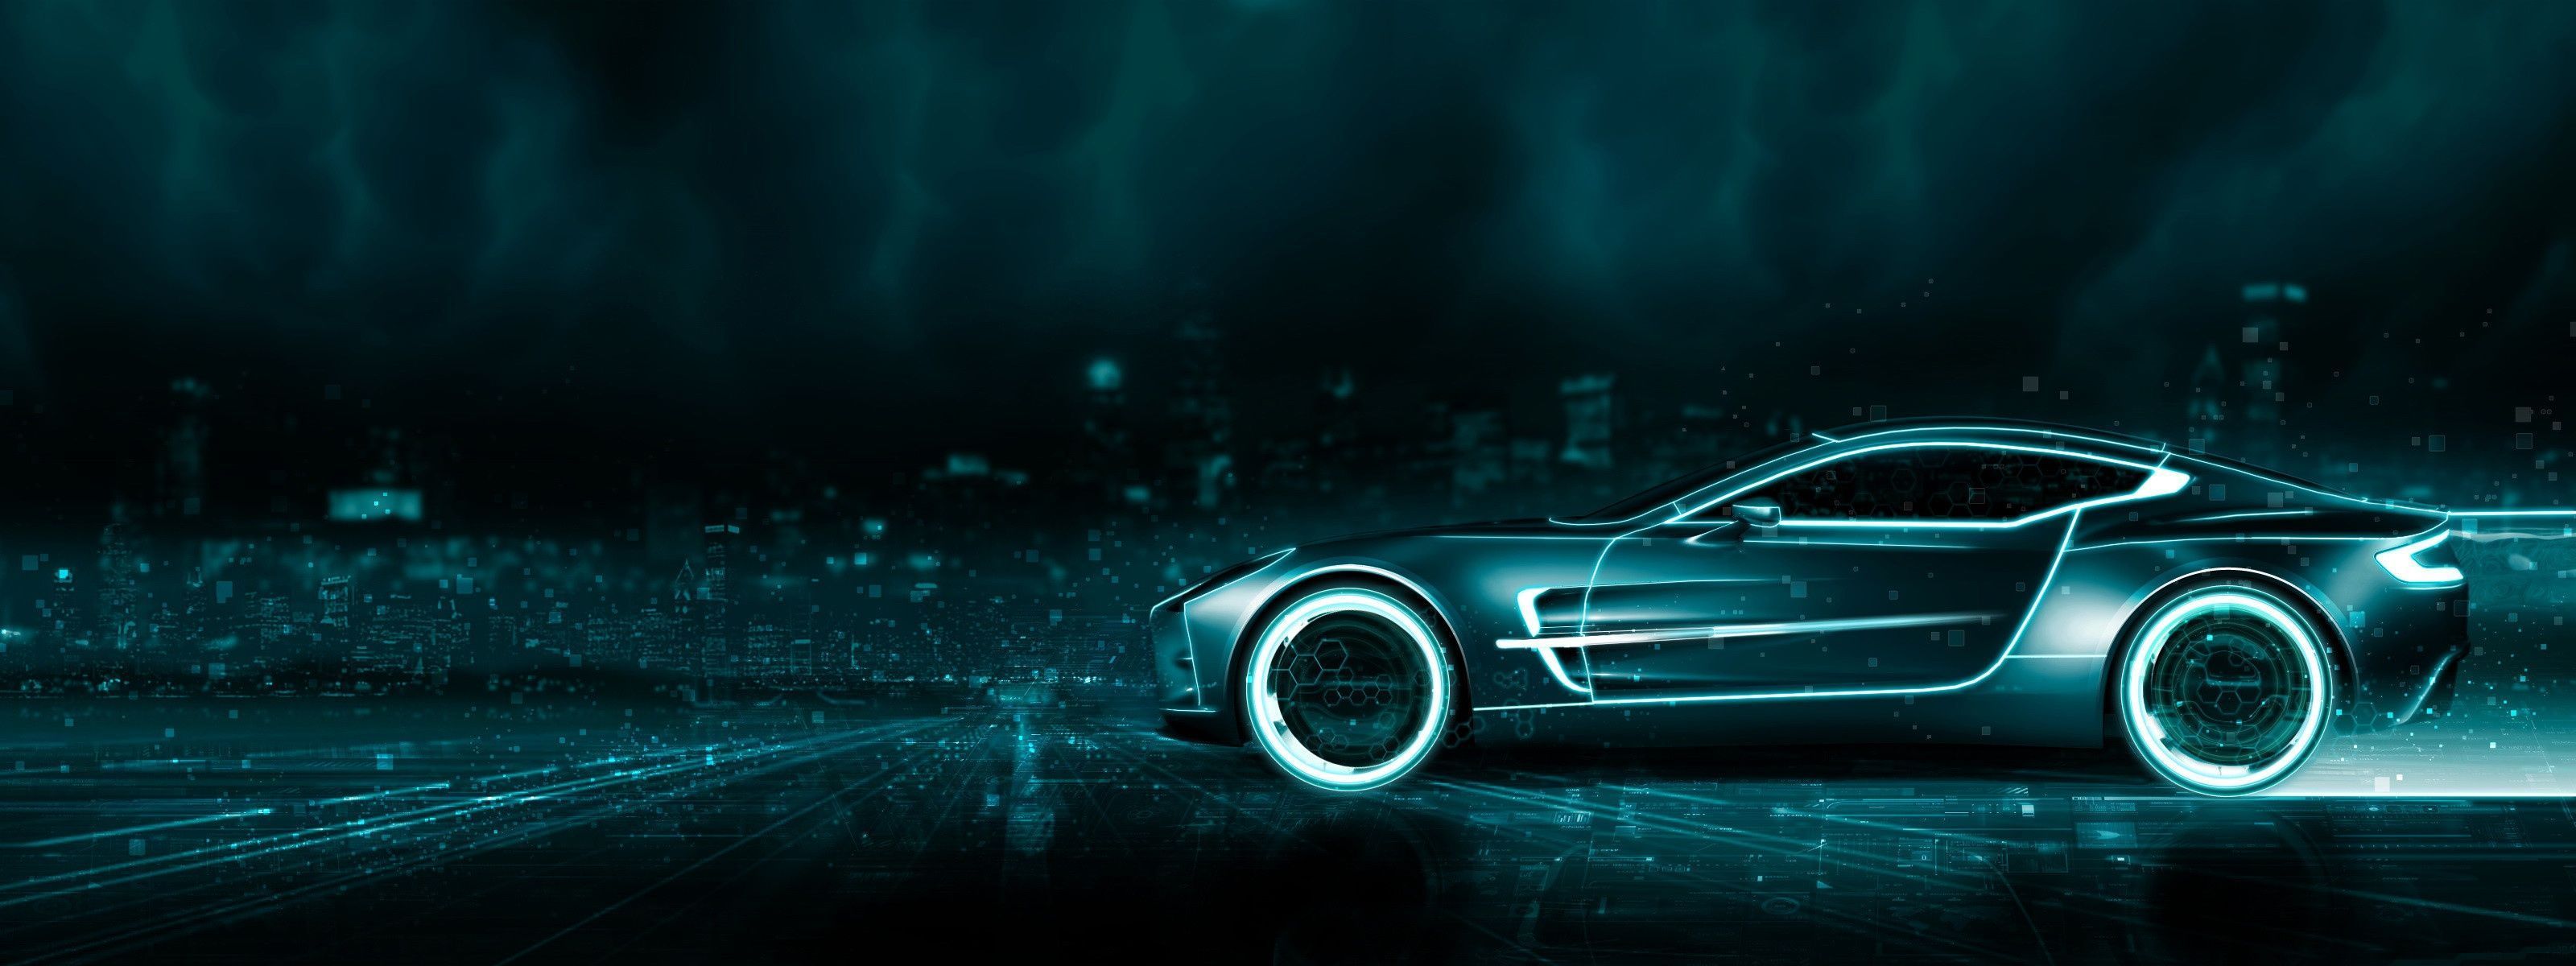 Wallpapers Tagged With TRON TRON HD Wallpapers